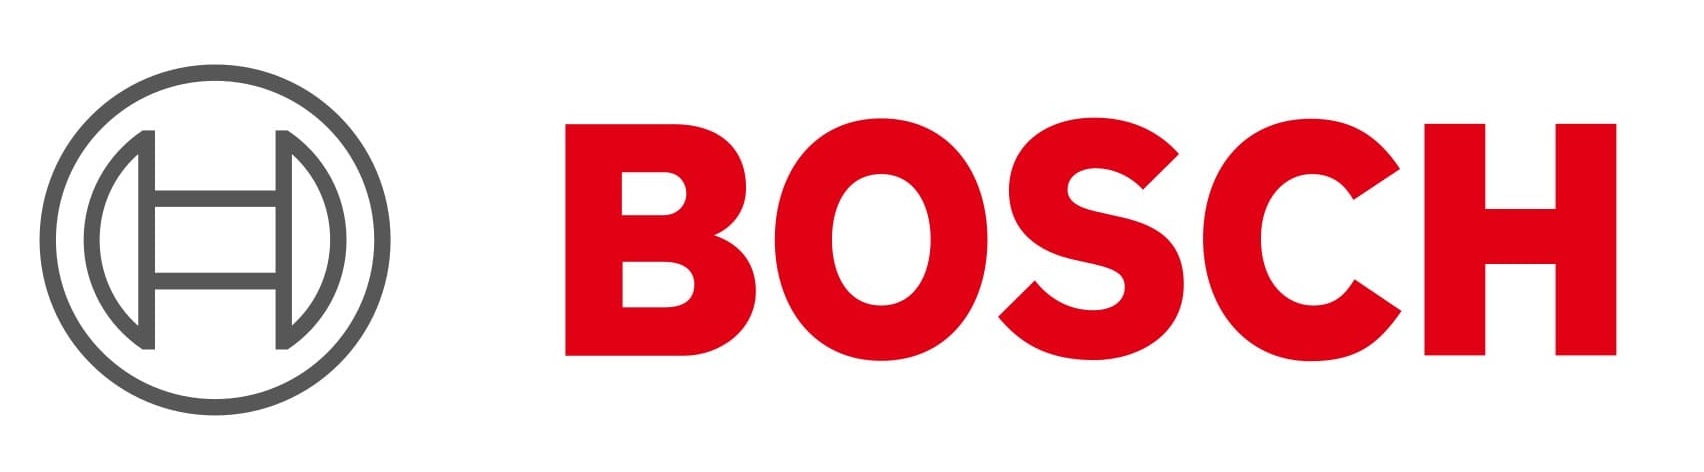 BOSCH Stoves Oven Repairs, Whirlpool Stoves Oven Service